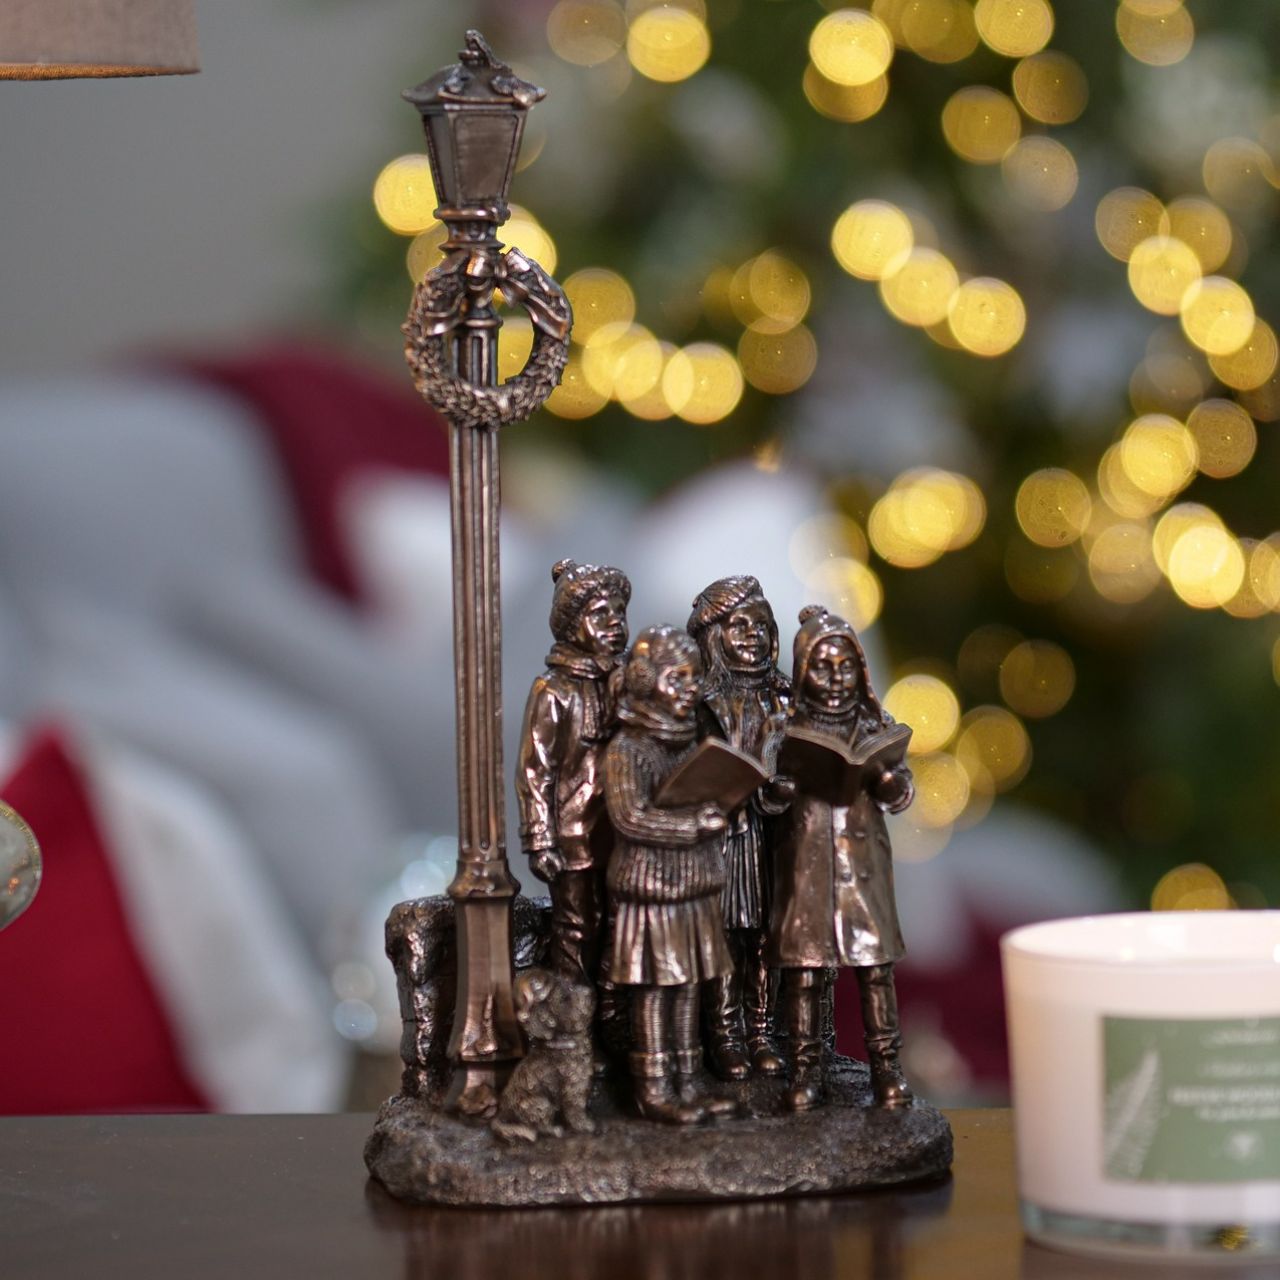 Genesis Ireland Christmas Carol Singers  A stunning ornament that is sure to bring festive cheer to your home. A beautiful bronze coloured Christmas decoration, by Genesis Ireland. Depicting a group of carol singers spreading the joy of Christmas. Let the magic of Christmas fill your home with this gorgeous sculpture for many years to come.